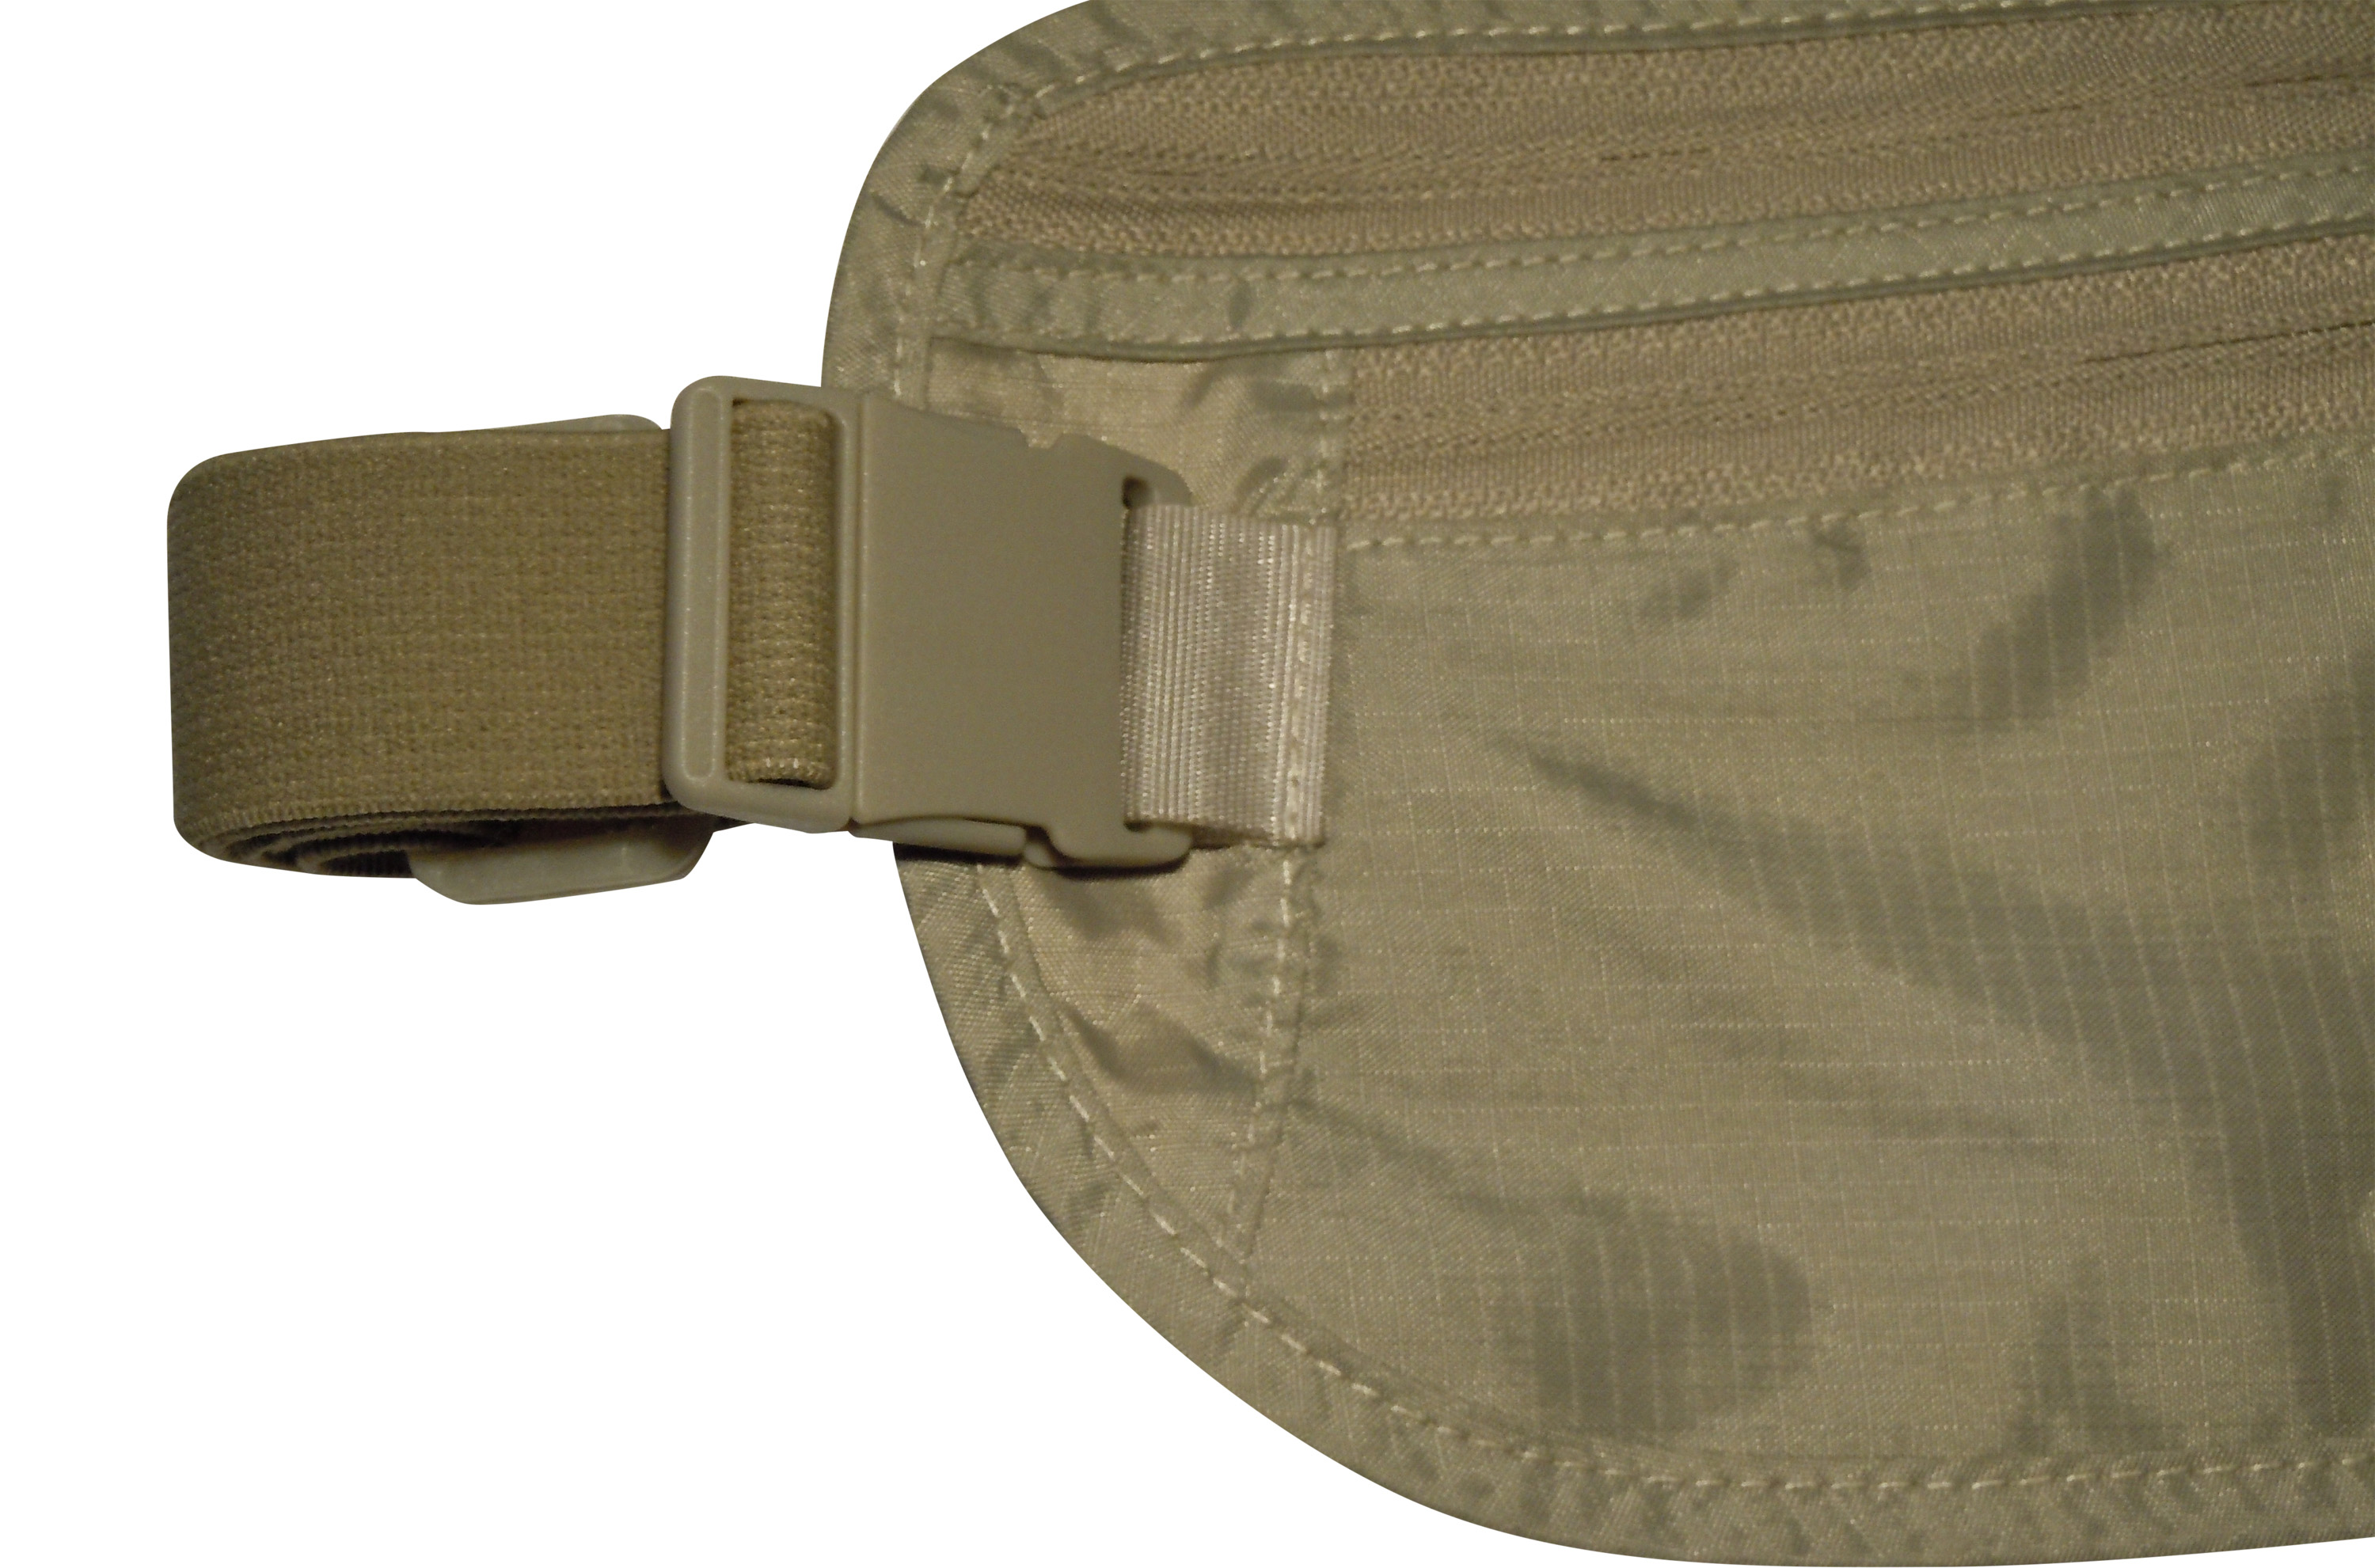 IGOGEER Deluxe Money Belt with RFID Blocking for Stopping